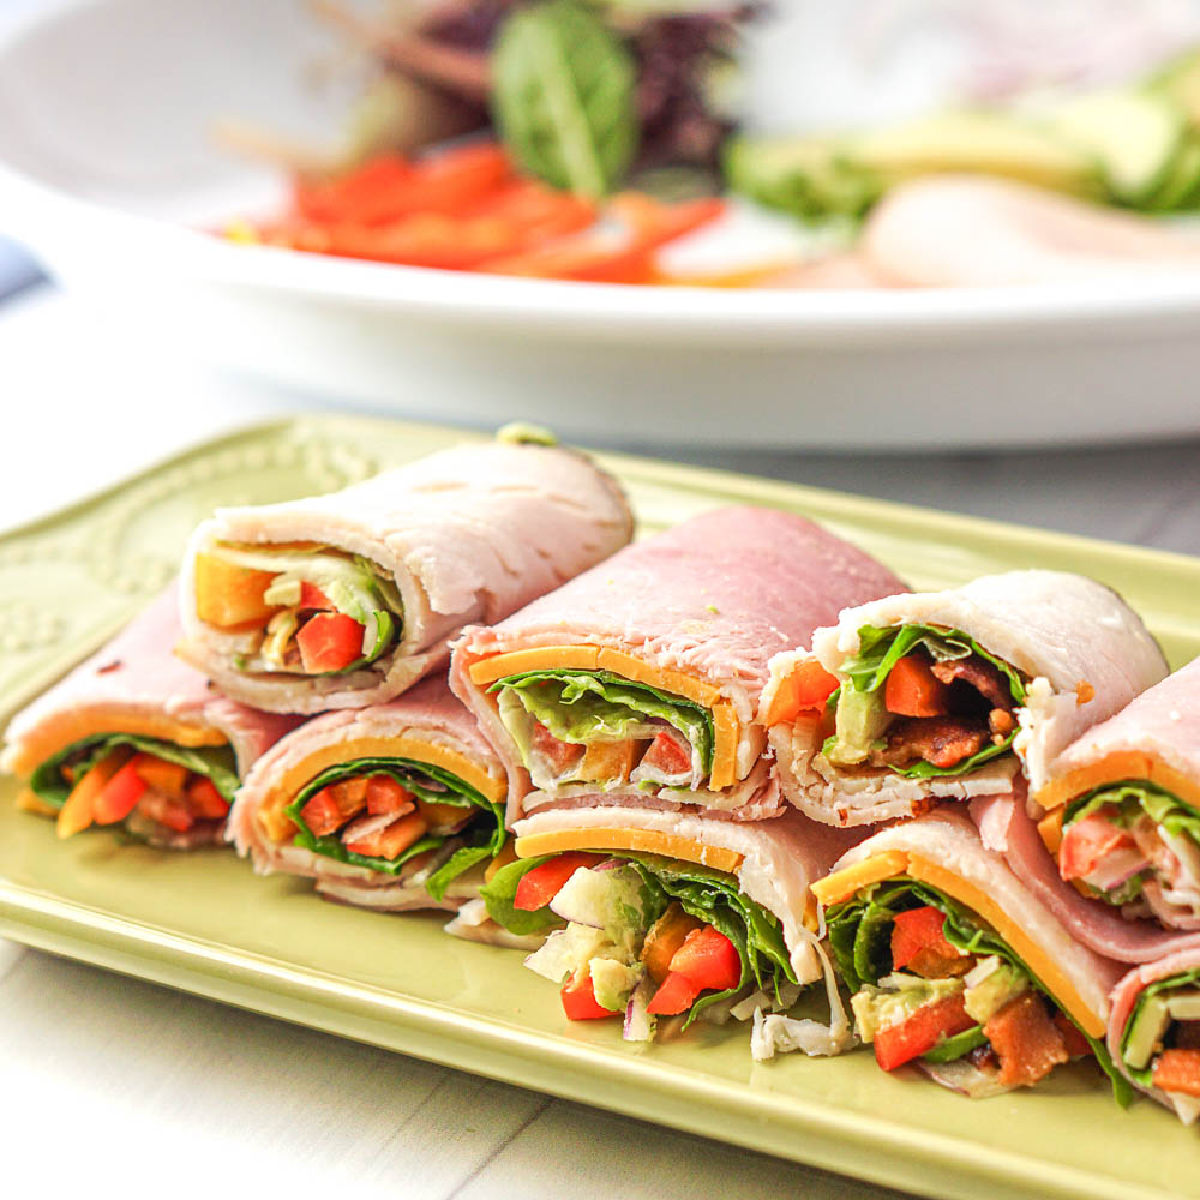 Still using cling wrap to store leftovers? Try Skinny Stacks